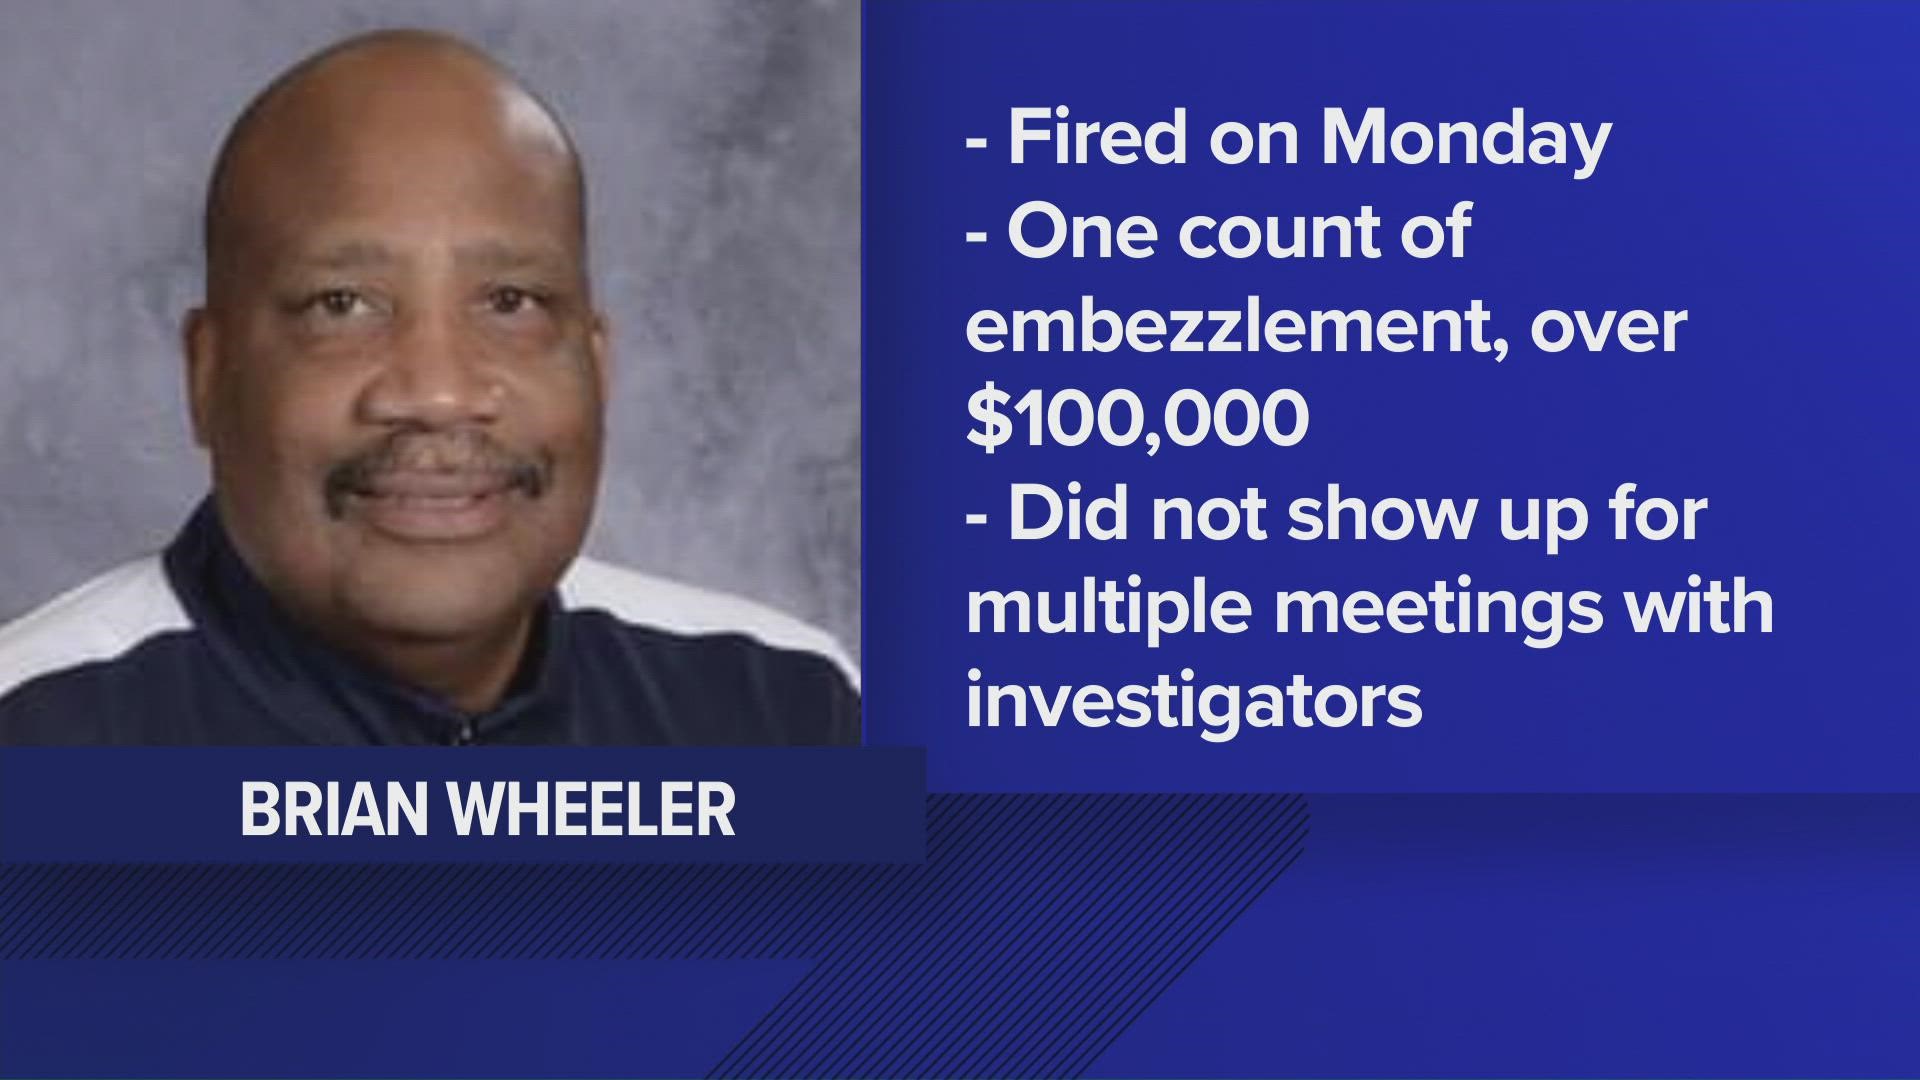 Wheeler failed to show up to multiple interviews about the irregularities in the district's funds. Police believe he has fled the area.